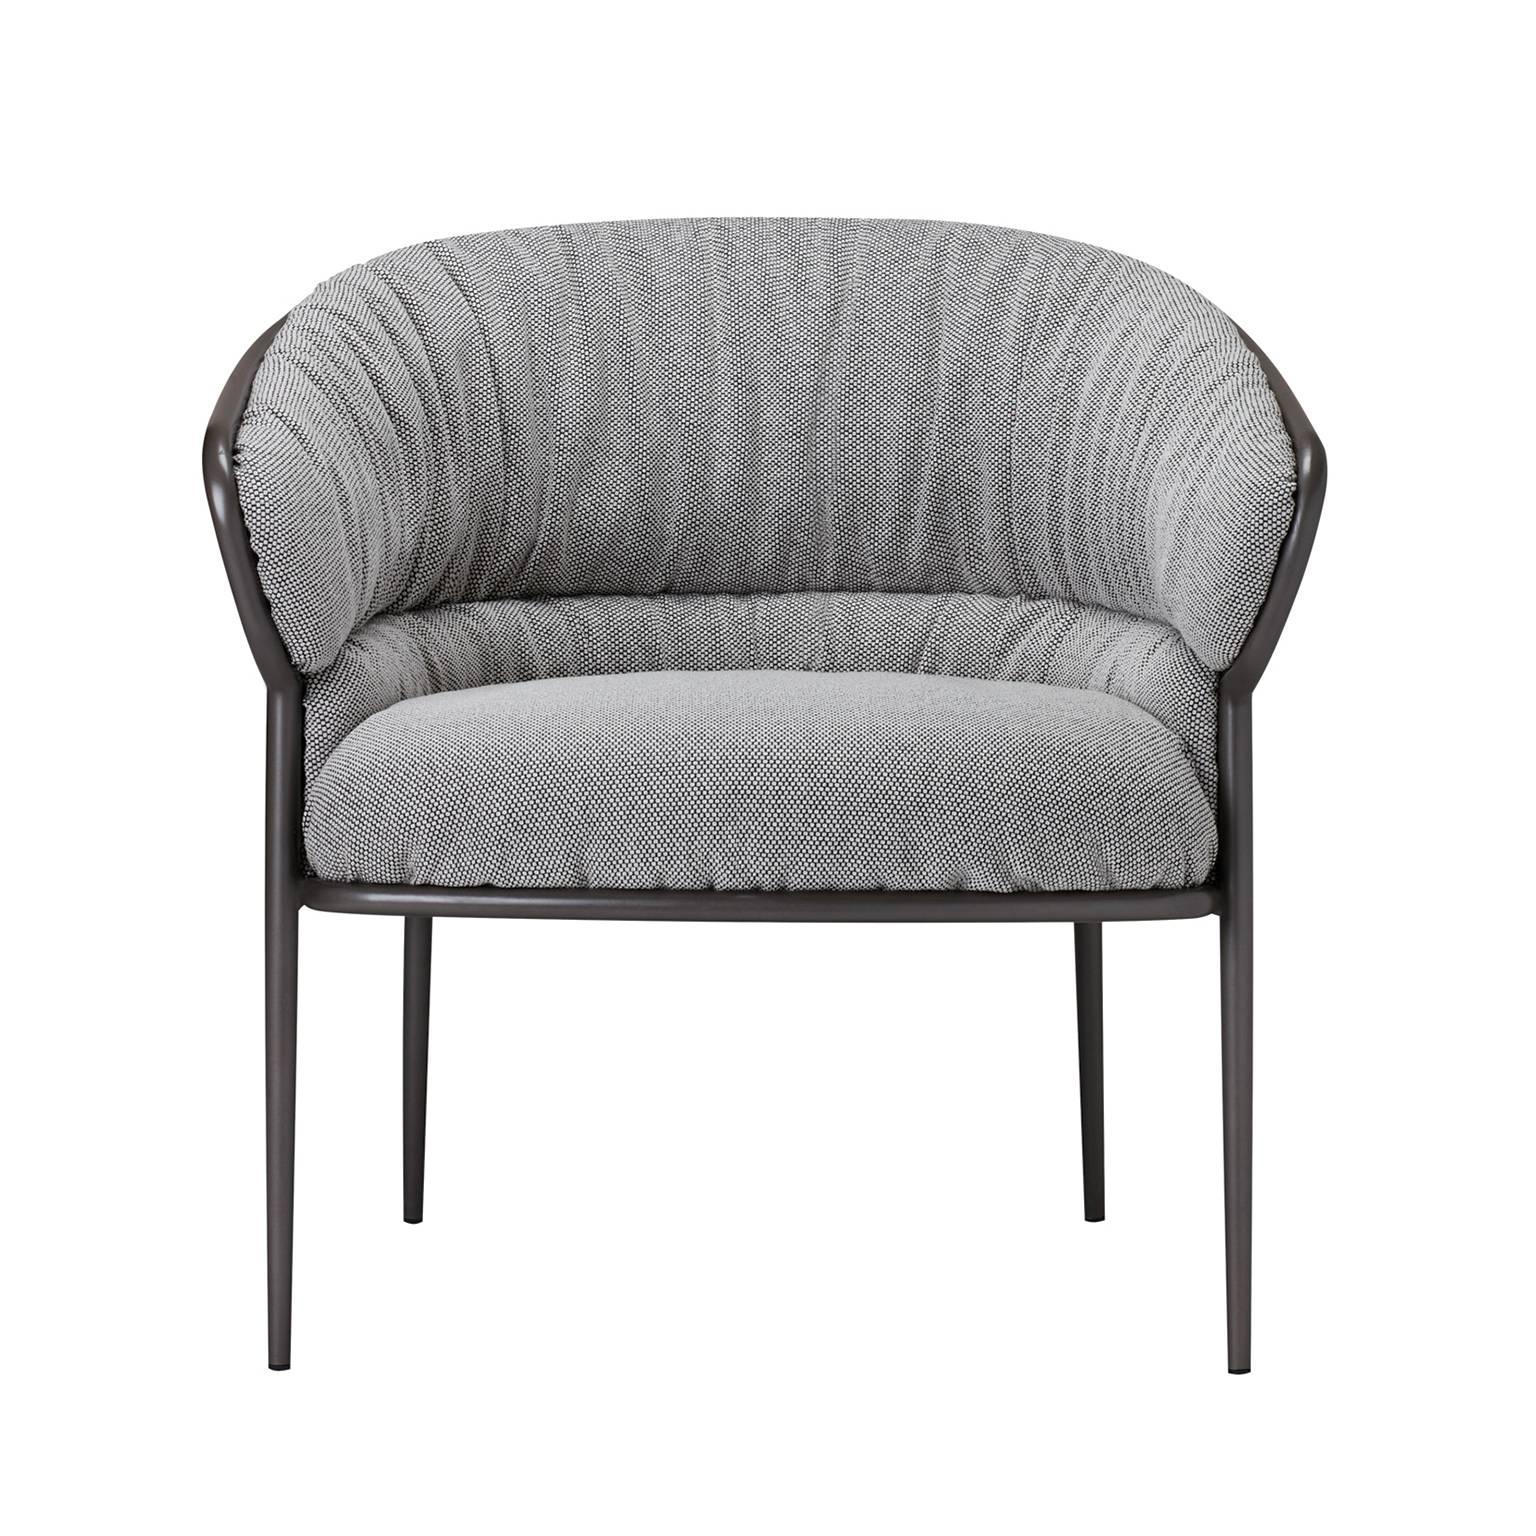 Italian SP01 Shu-Ying Armchair in OSLO Pepper Fabric, Made in Italy For Sale